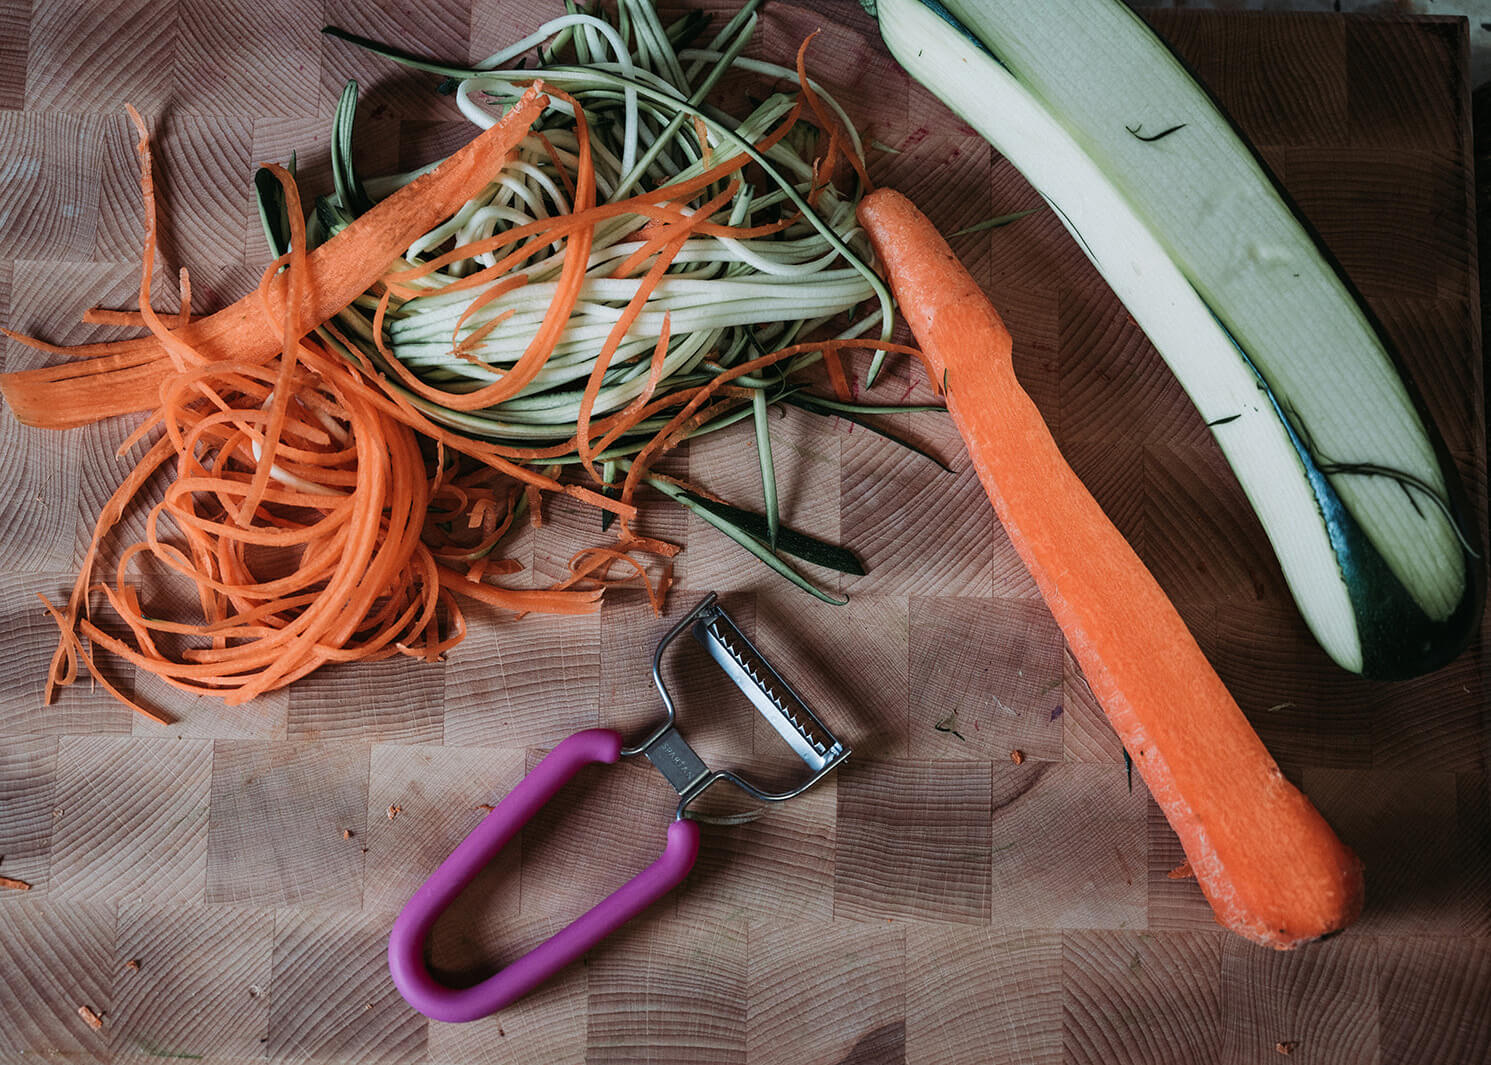 Spartan Shredder with extra-sharp Japanese-steel blades lays on a cutting board beside shredded carrot and zucchini